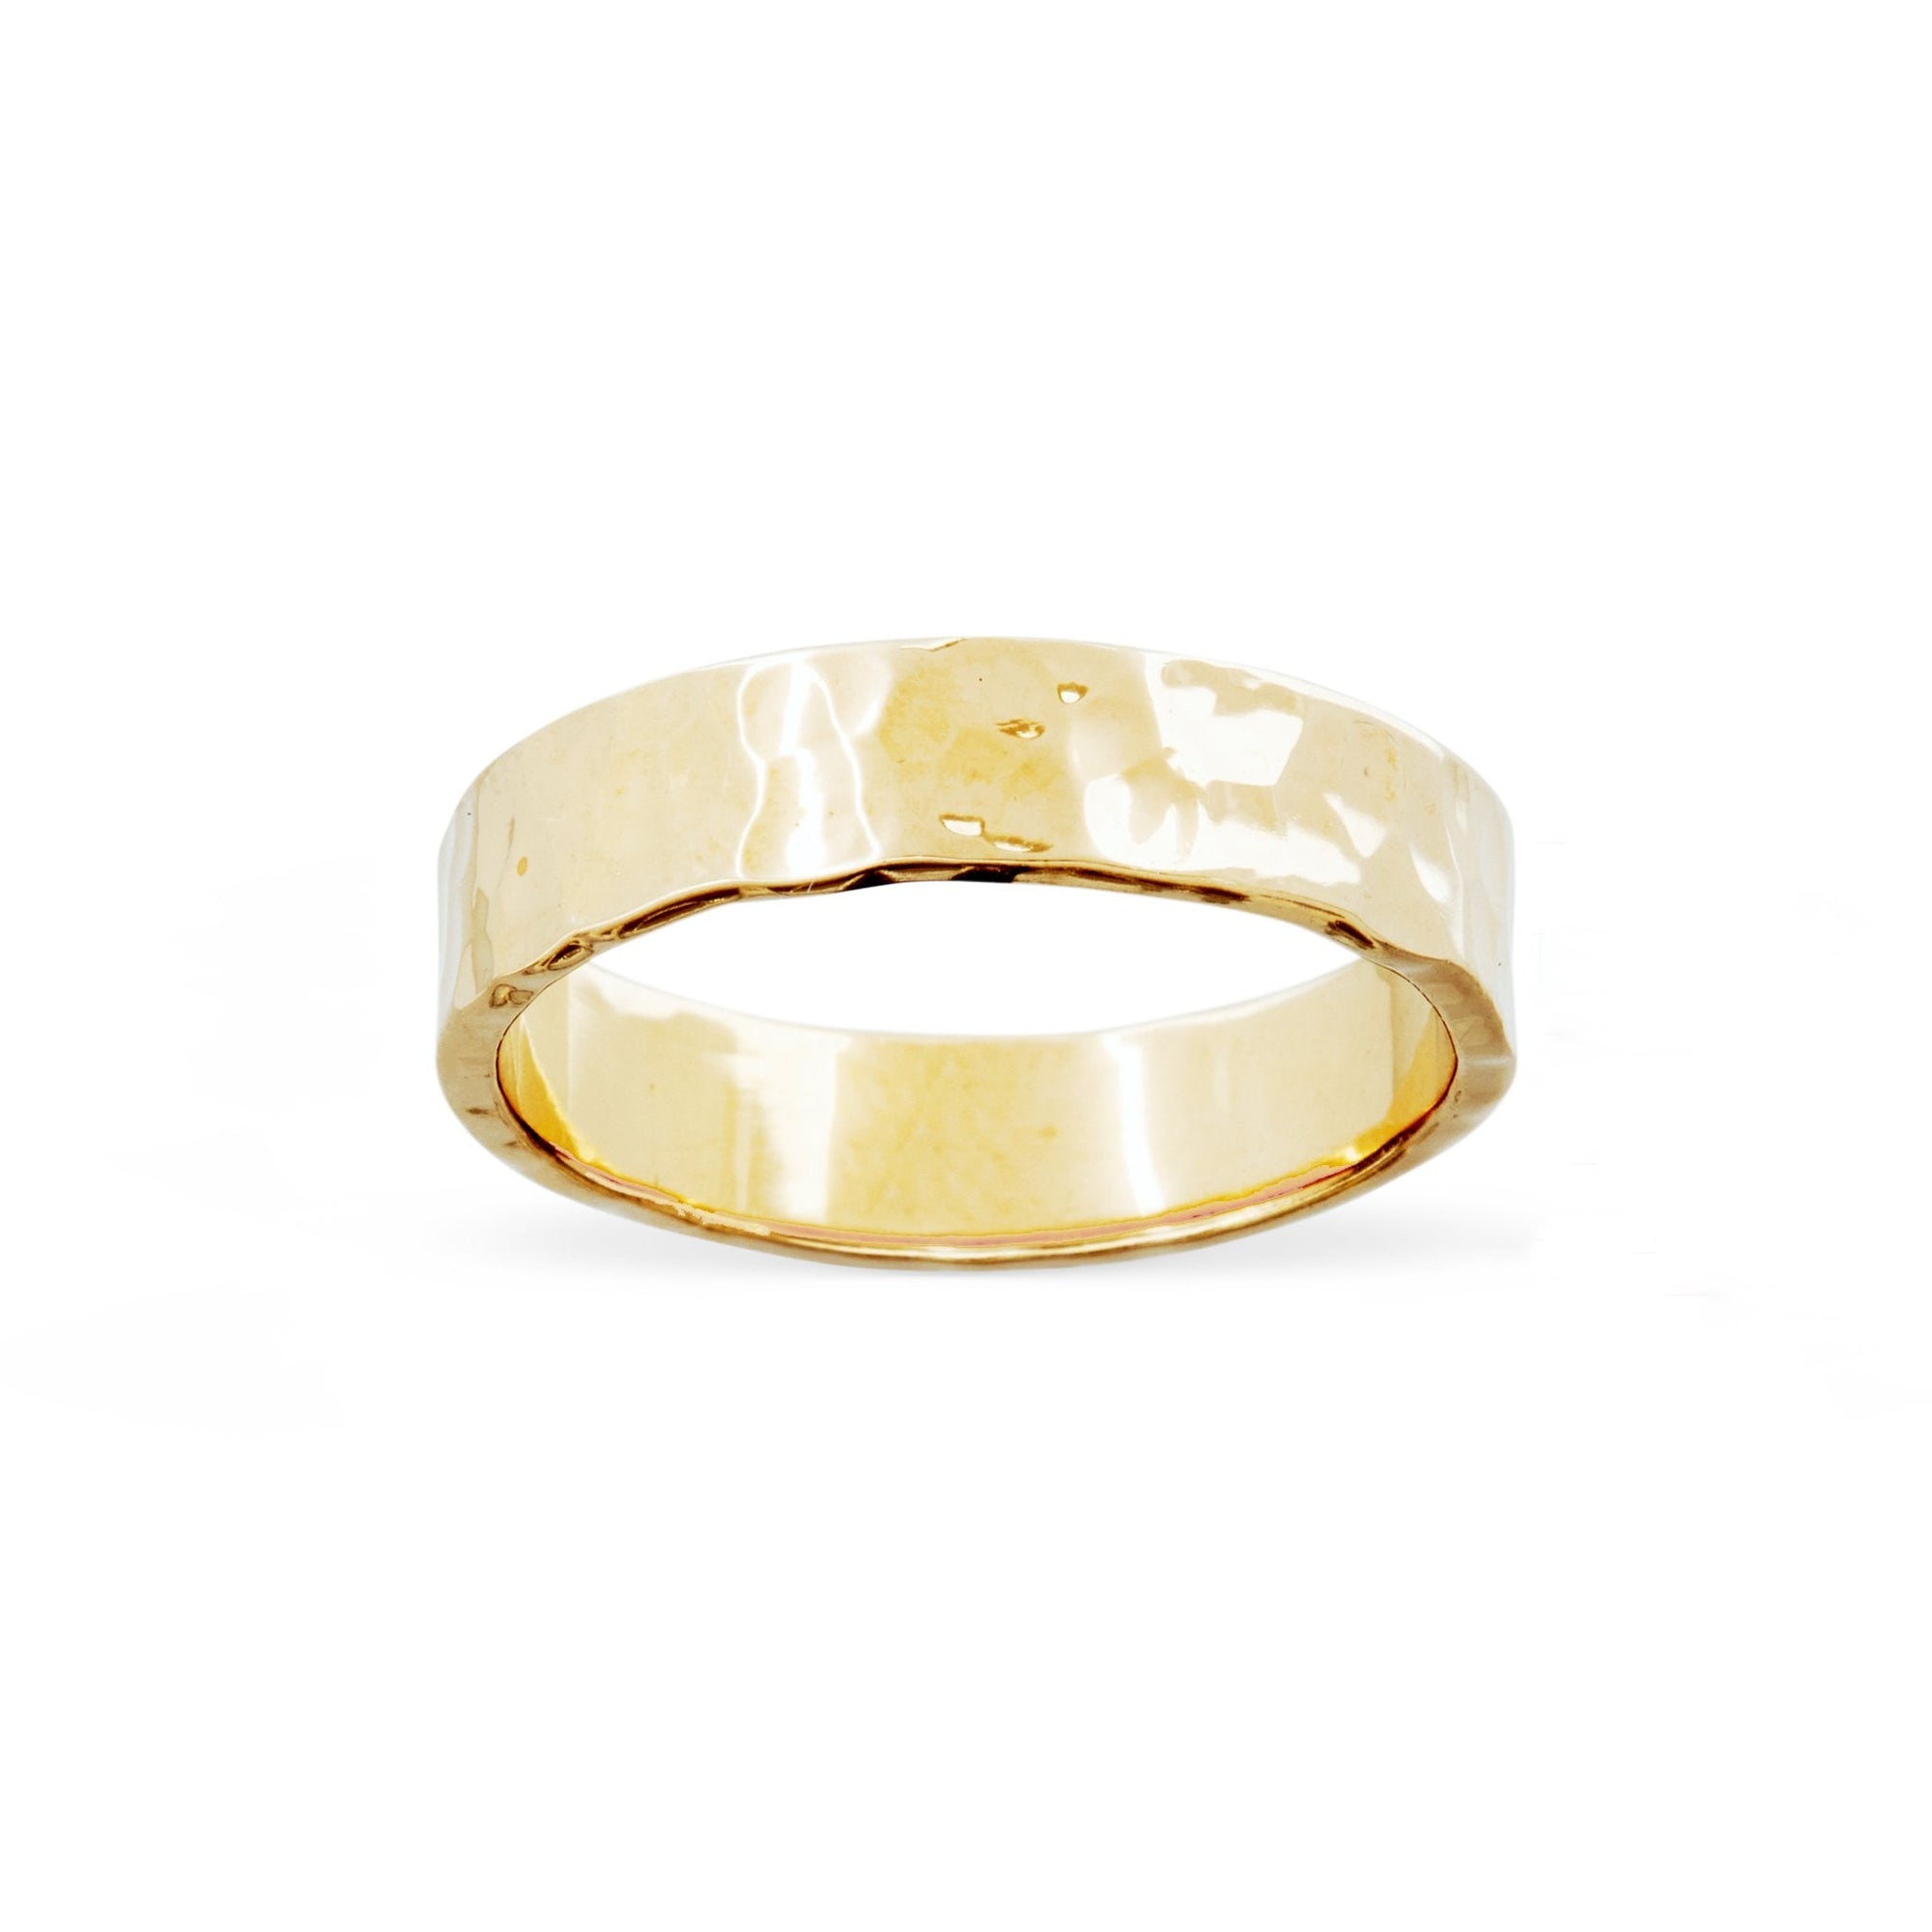 Duo Jewellery Rings Duo hammered organic ring